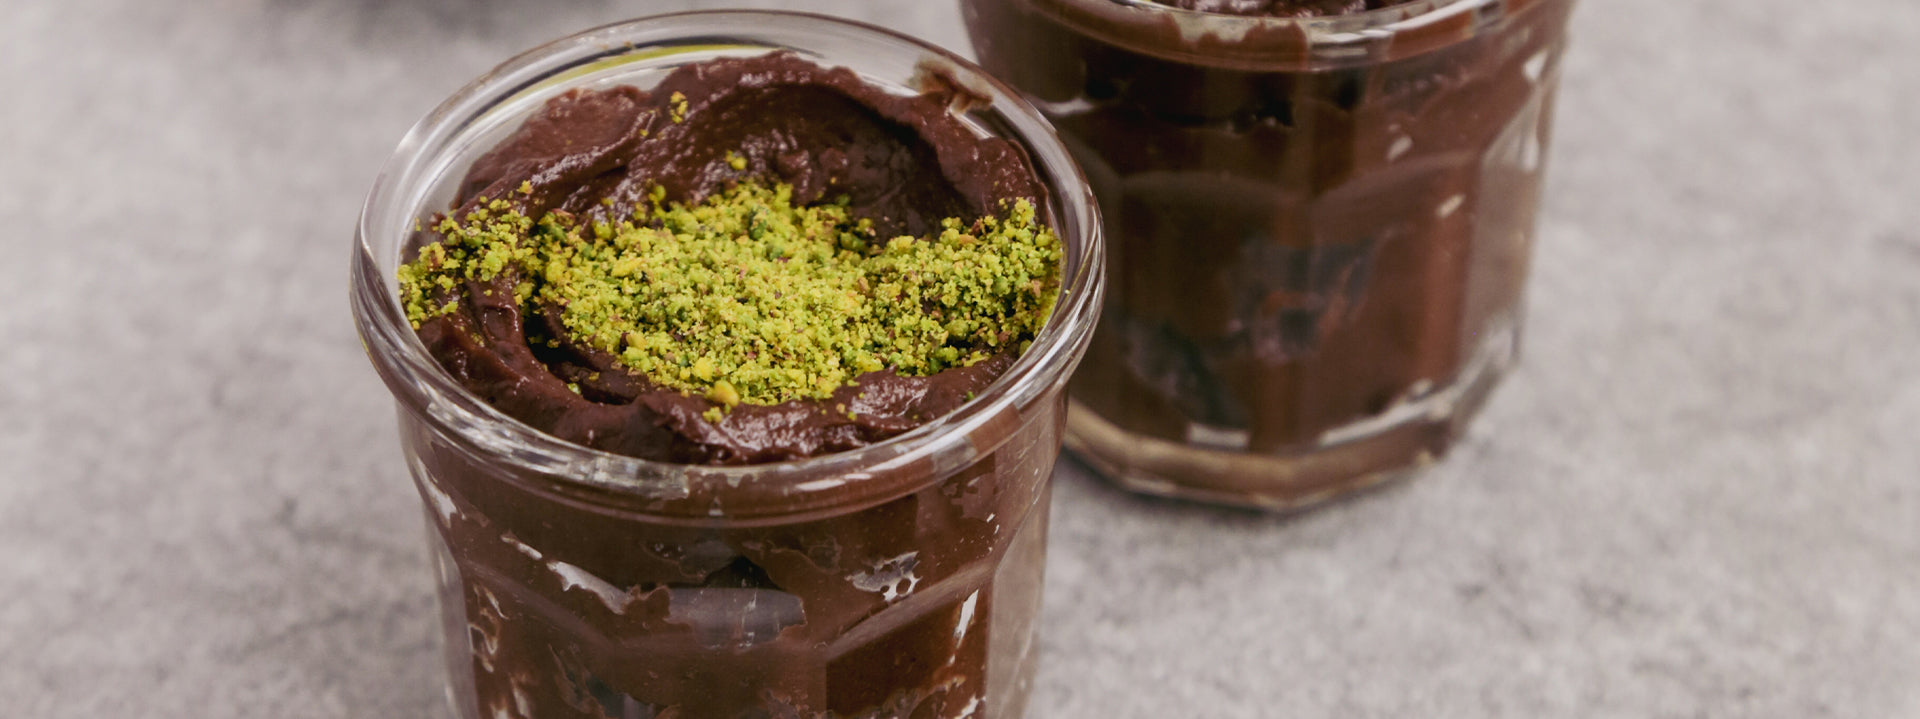 AVOCADO AND DATE MOUSSE